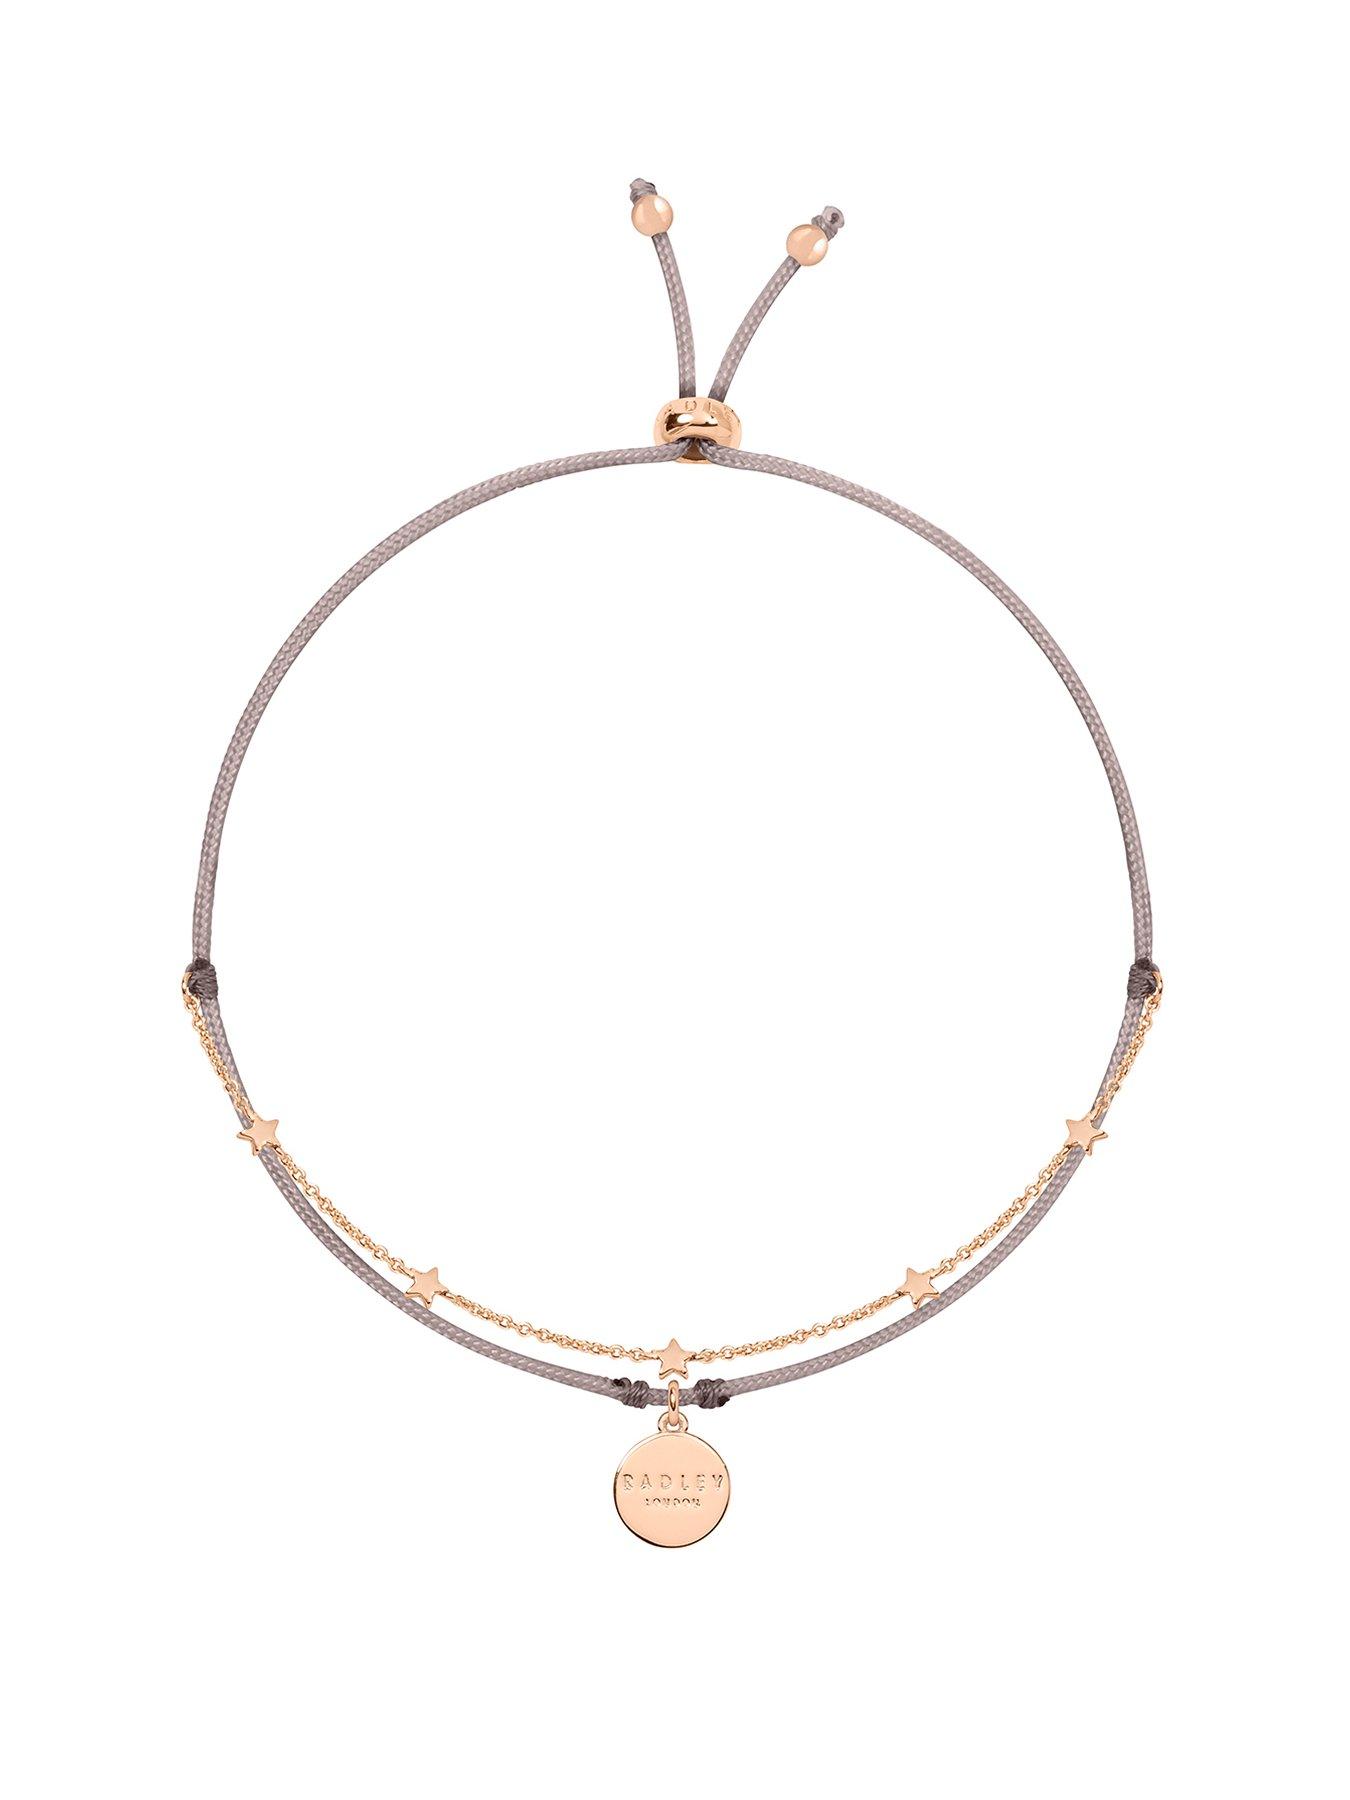 Jewellery & watches 18 carat Rose Gold plated Ladies Bracelet